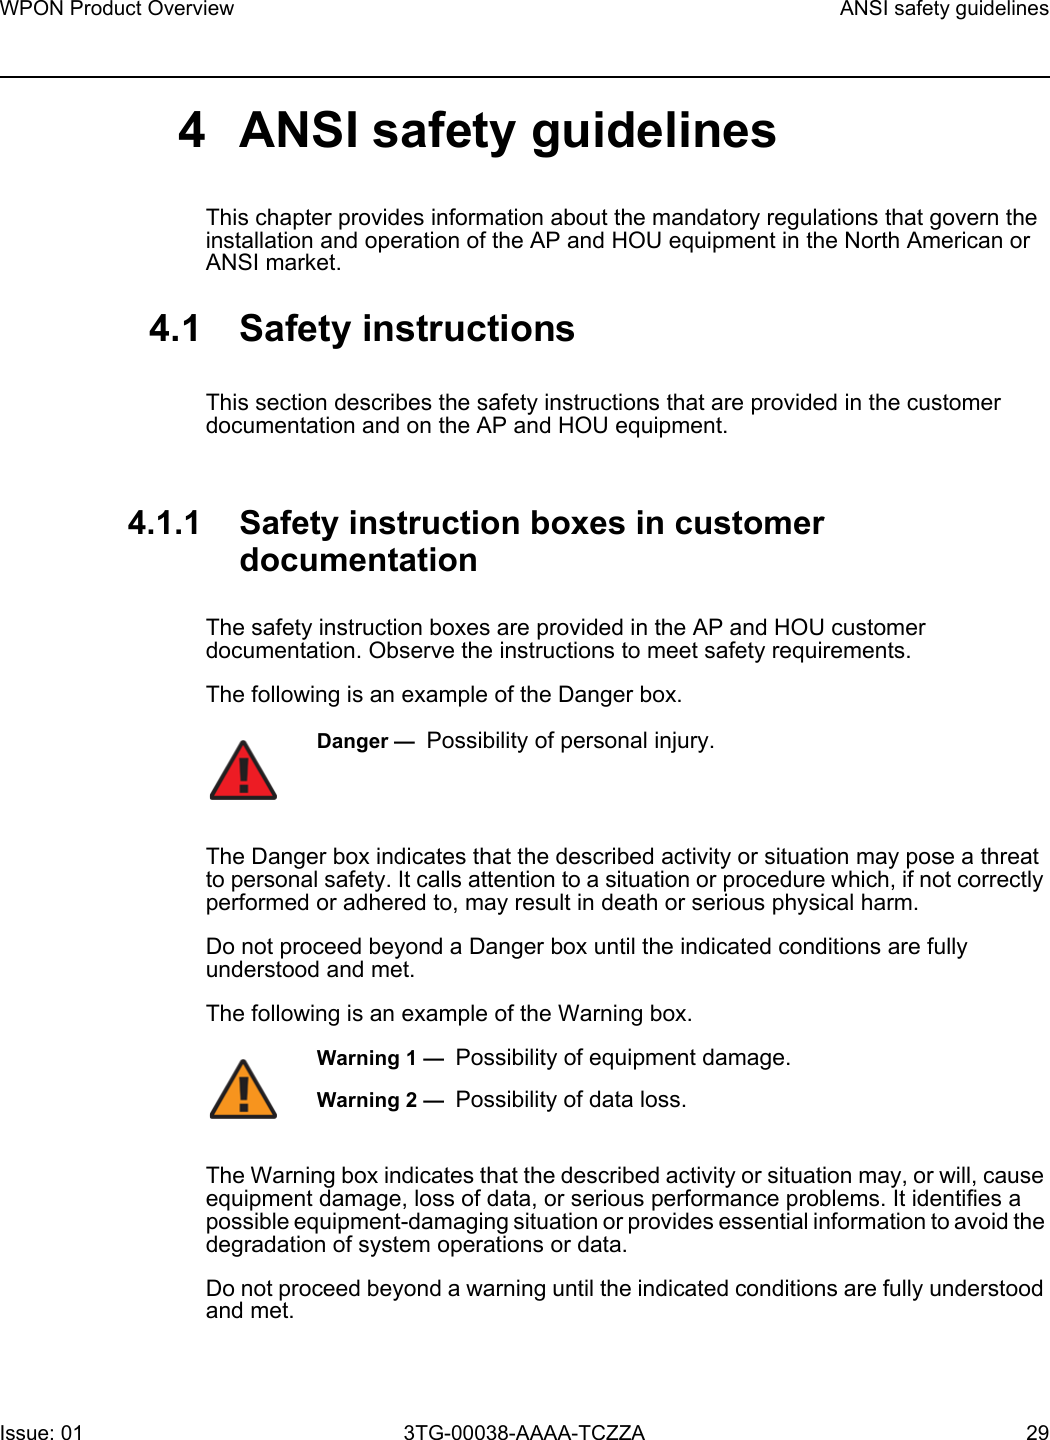 WPON Product Overview ANSI safety guidelinesIssue: 01 3TG-00038-AAAA-TCZZA 29 4 ANSI safety guidelinesThis chapter provides information about the mandatory regulations that govern the installation and operation of the AP and HOU equipment in the North American or ANSI market.4.1 Safety instructionsThis section describes the safety instructions that are provided in the customer documentation and on the AP and HOU equipment.4.1.1 Safety instruction boxes in customer documentationThe safety instruction boxes are provided in the AP and HOU customer documentation. Observe the instructions to meet safety requirements.The following is an example of the Danger box.The Danger box indicates that the described activity or situation may pose a threat to personal safety. It calls attention to a situation or procedure which, if not correctly performed or adhered to, may result in death or serious physical harm. Do not proceed beyond a Danger box until the indicated conditions are fully understood and met.The following is an example of the Warning box.The Warning box indicates that the described activity or situation may, or will, cause equipment damage, loss of data, or serious performance problems. It identifies a possible equipment-damaging situation or provides essential information to avoid the degradation of system operations or data.Do not proceed beyond a warning until the indicated conditions are fully understood and met.Danger —  Possibility of personal injury. Warning 1 —  Possibility of equipment damage.Warning 2 —  Possibility of data loss.